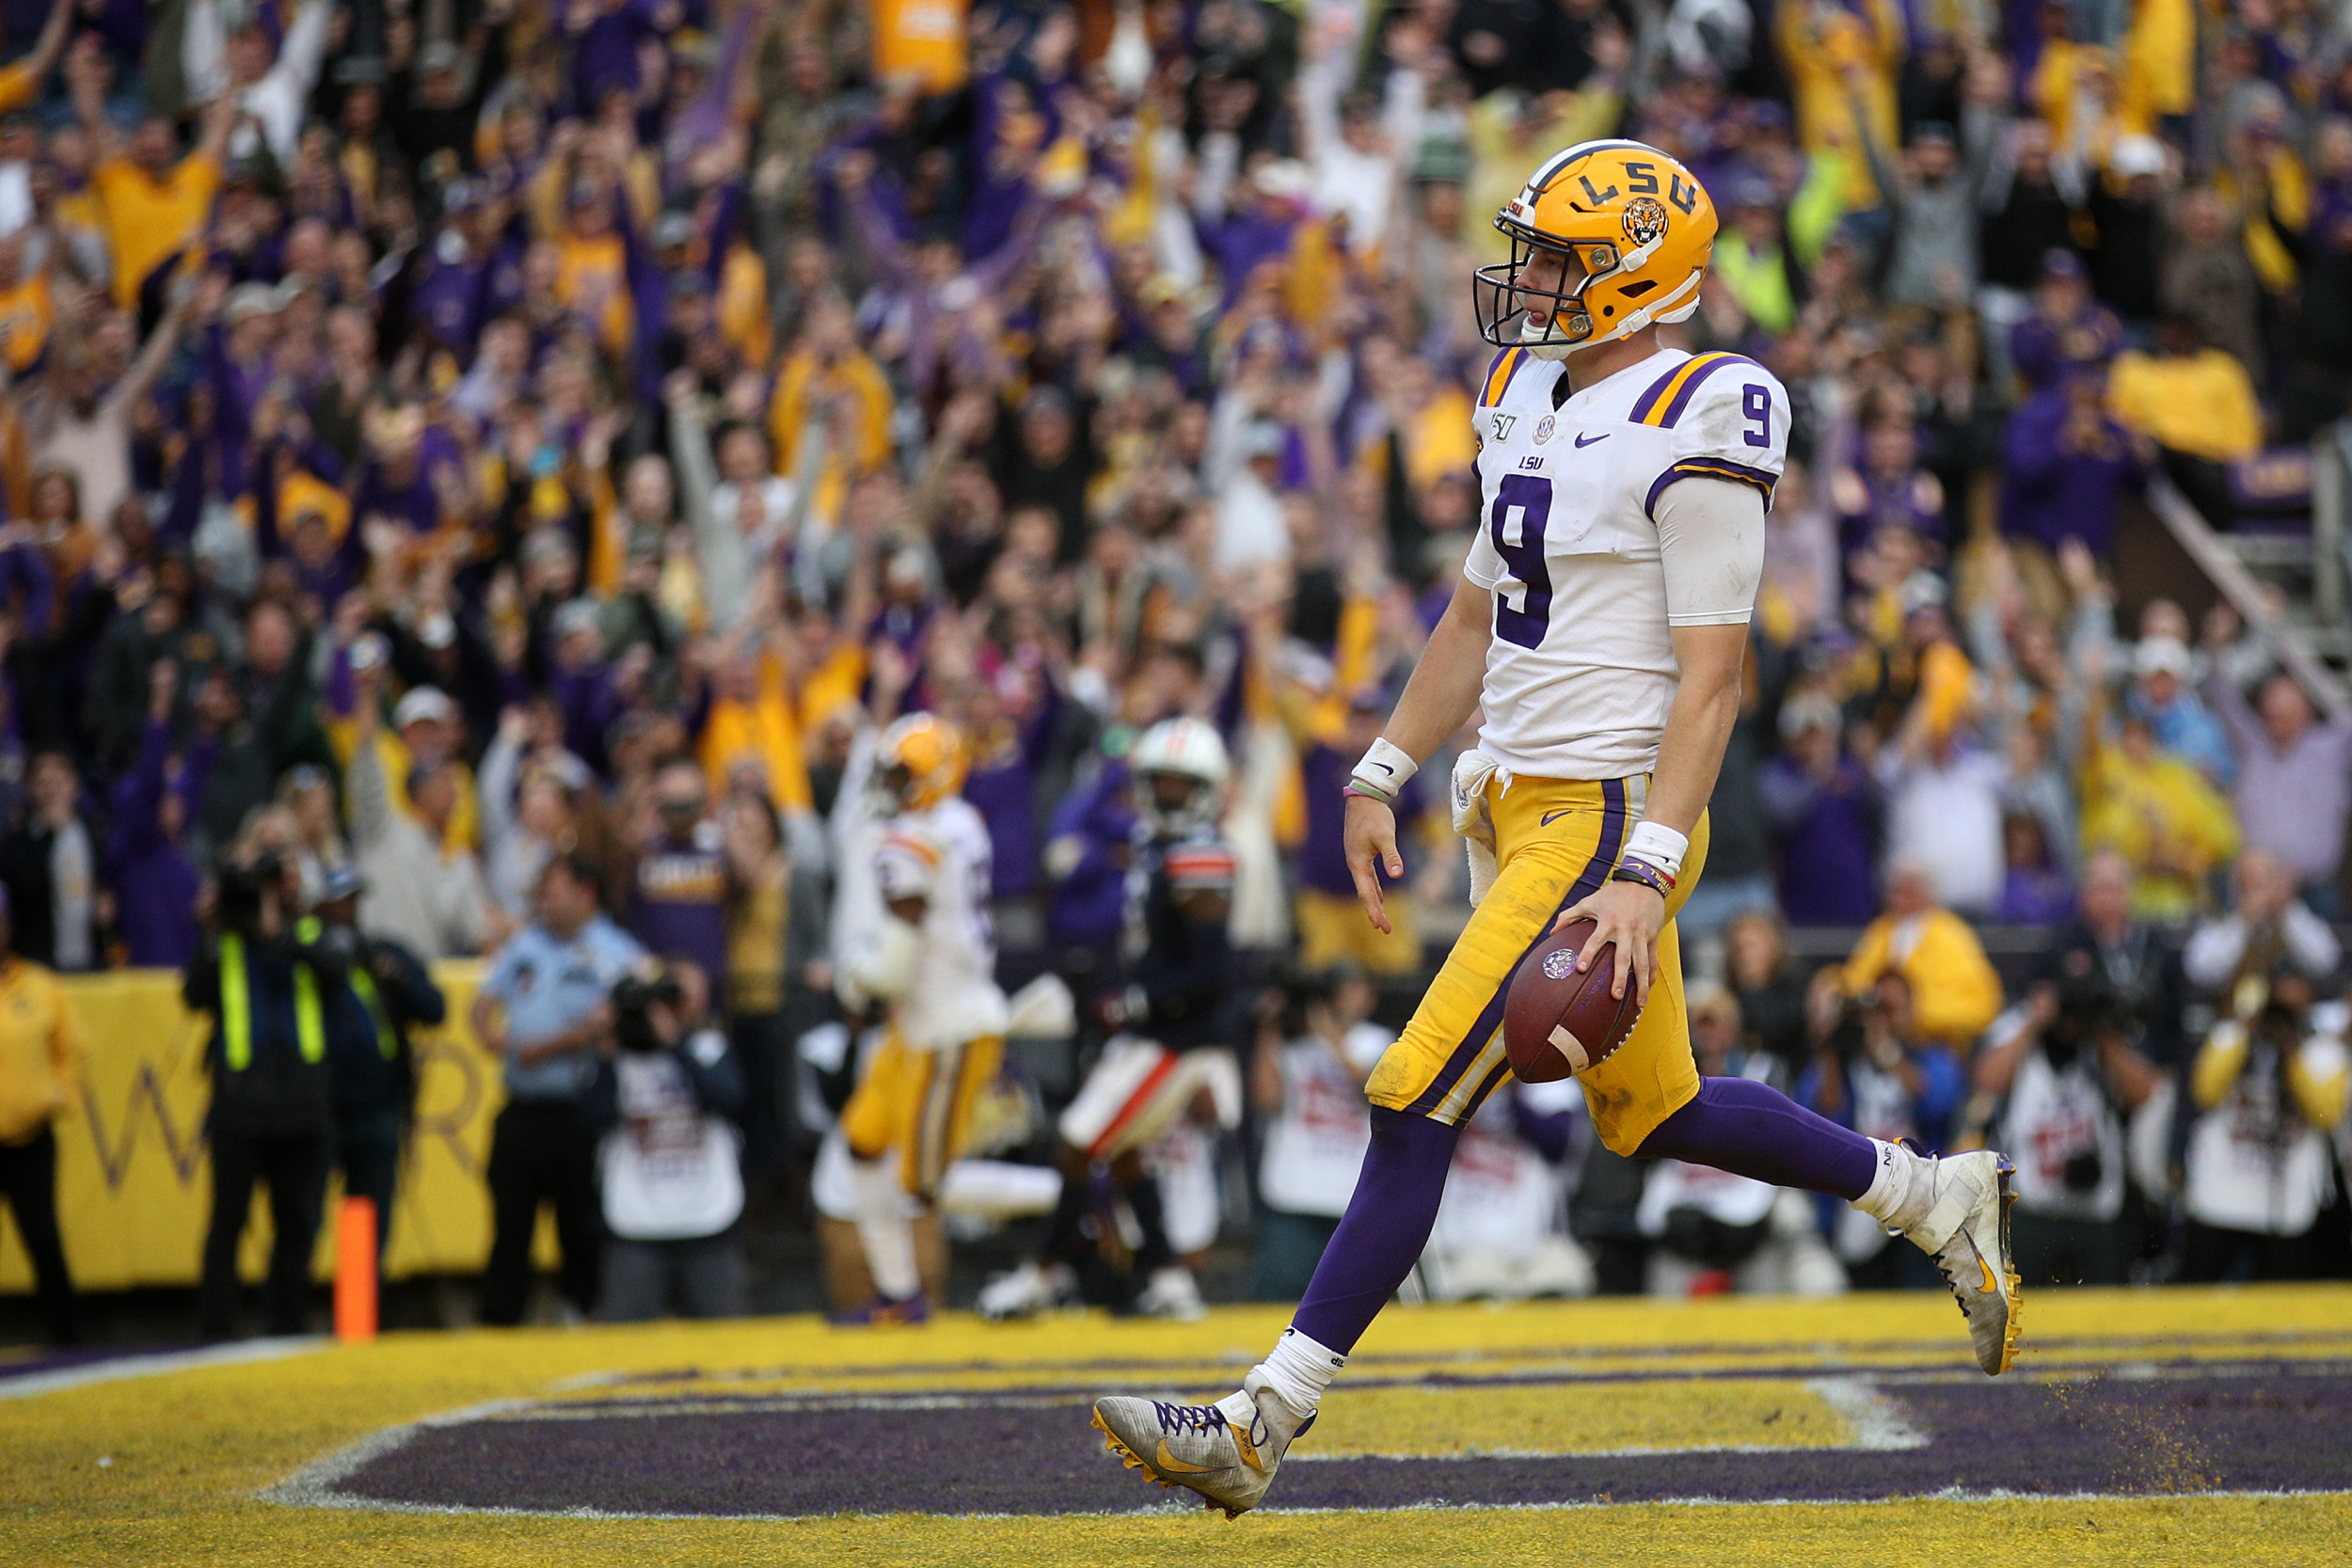 Lsu Vs Alabama Why The Tigers Have To Make History To Win